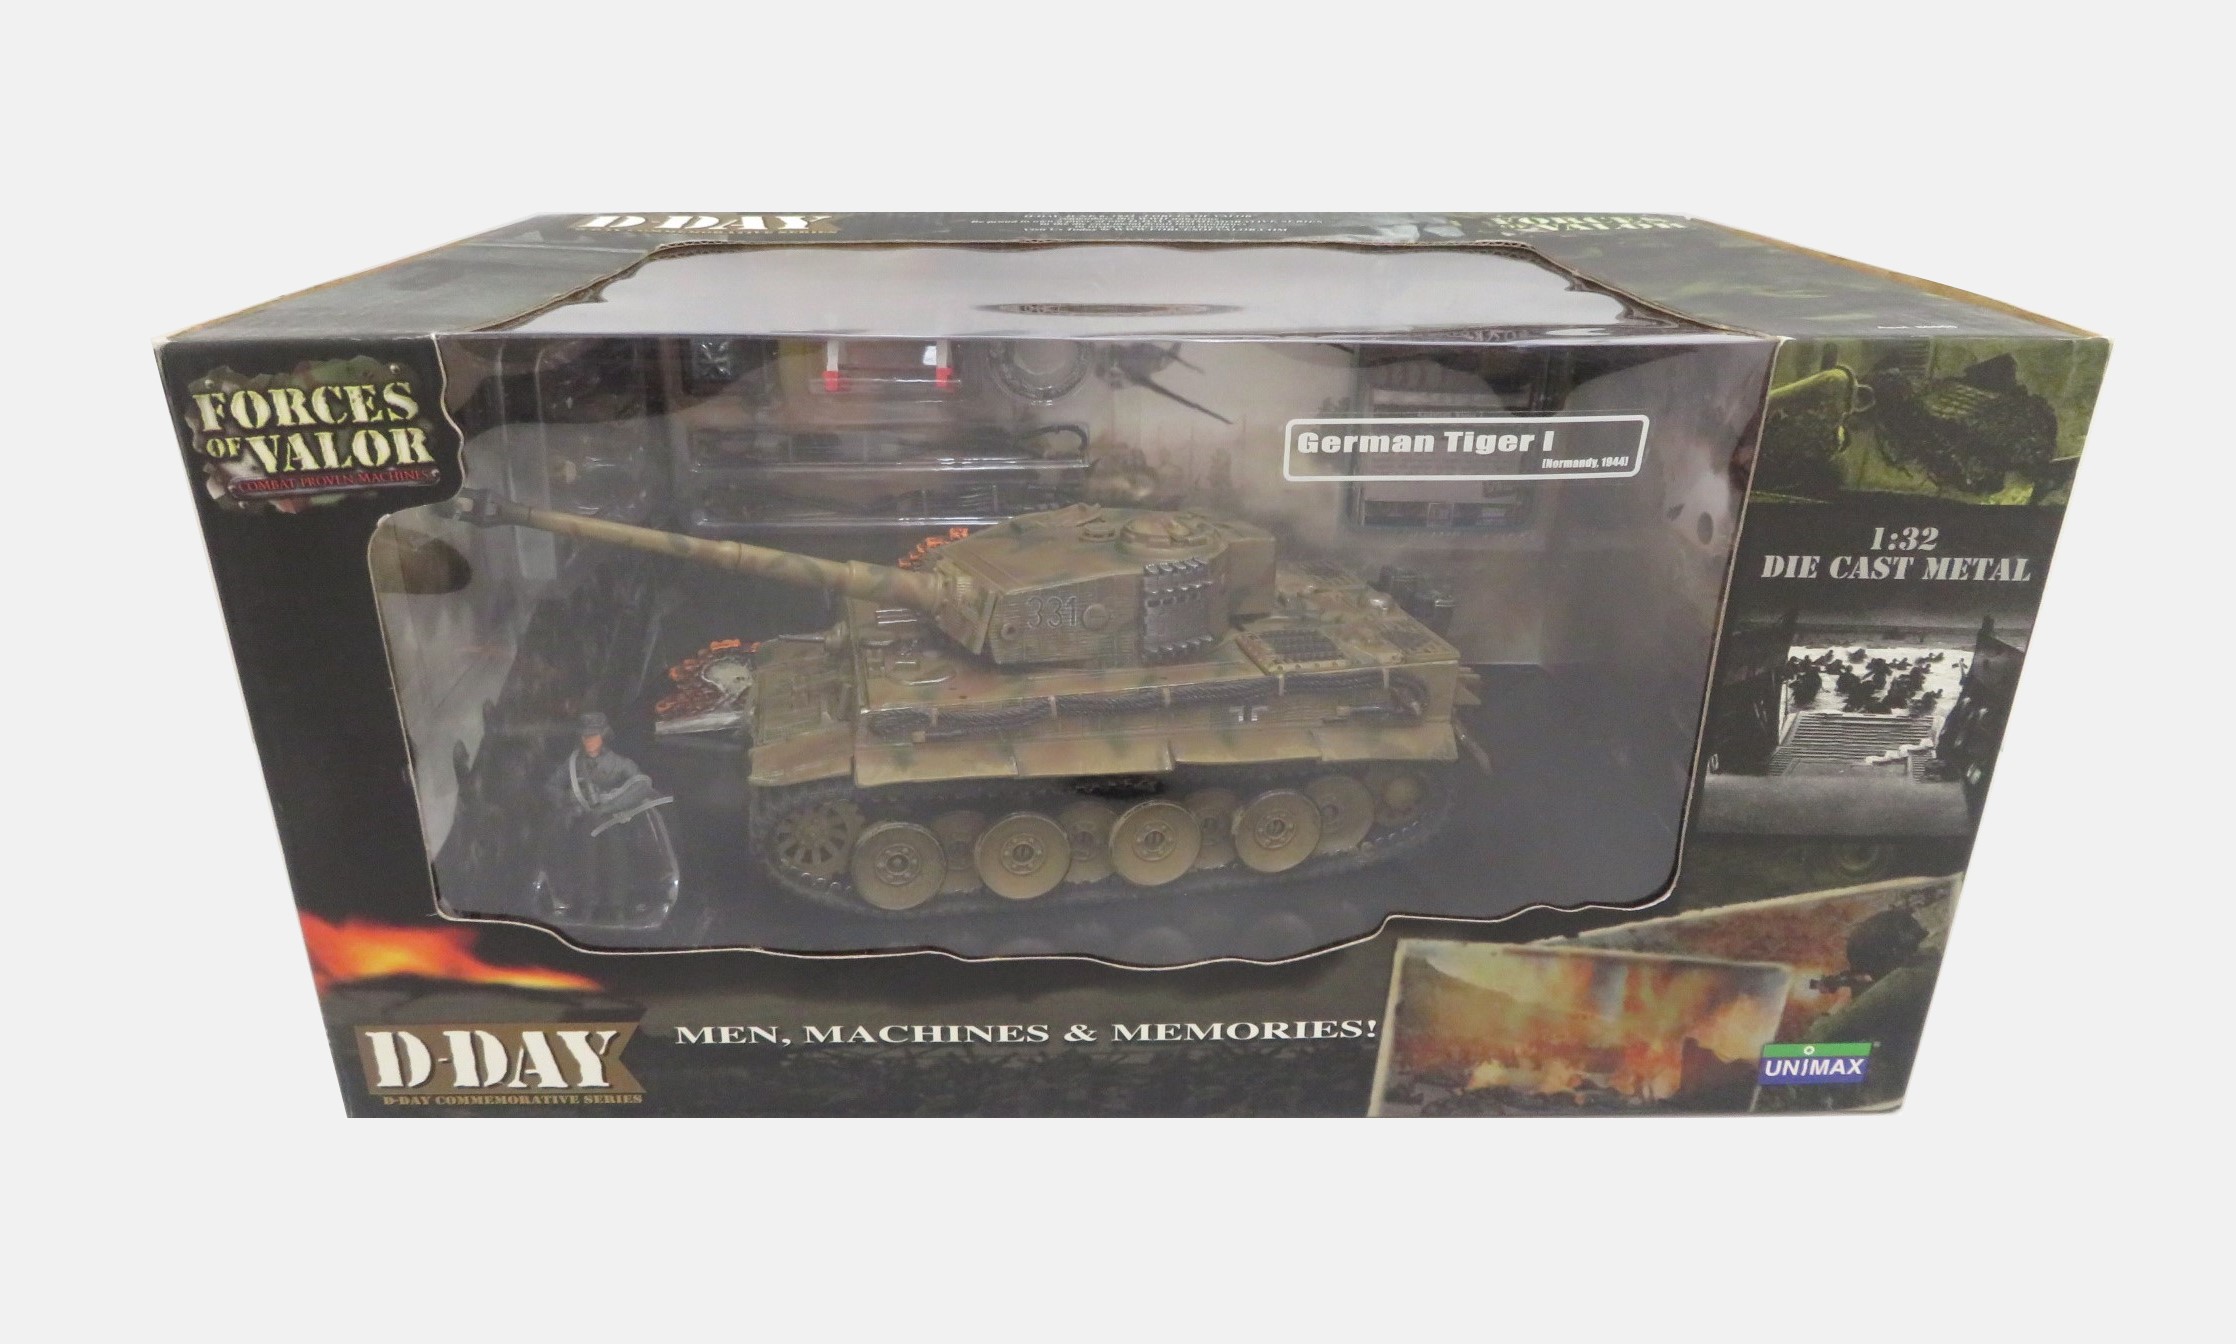 Forces of Valor 80604 - 1:32 German Tiger 1 Tank - D-Day, Normandy 